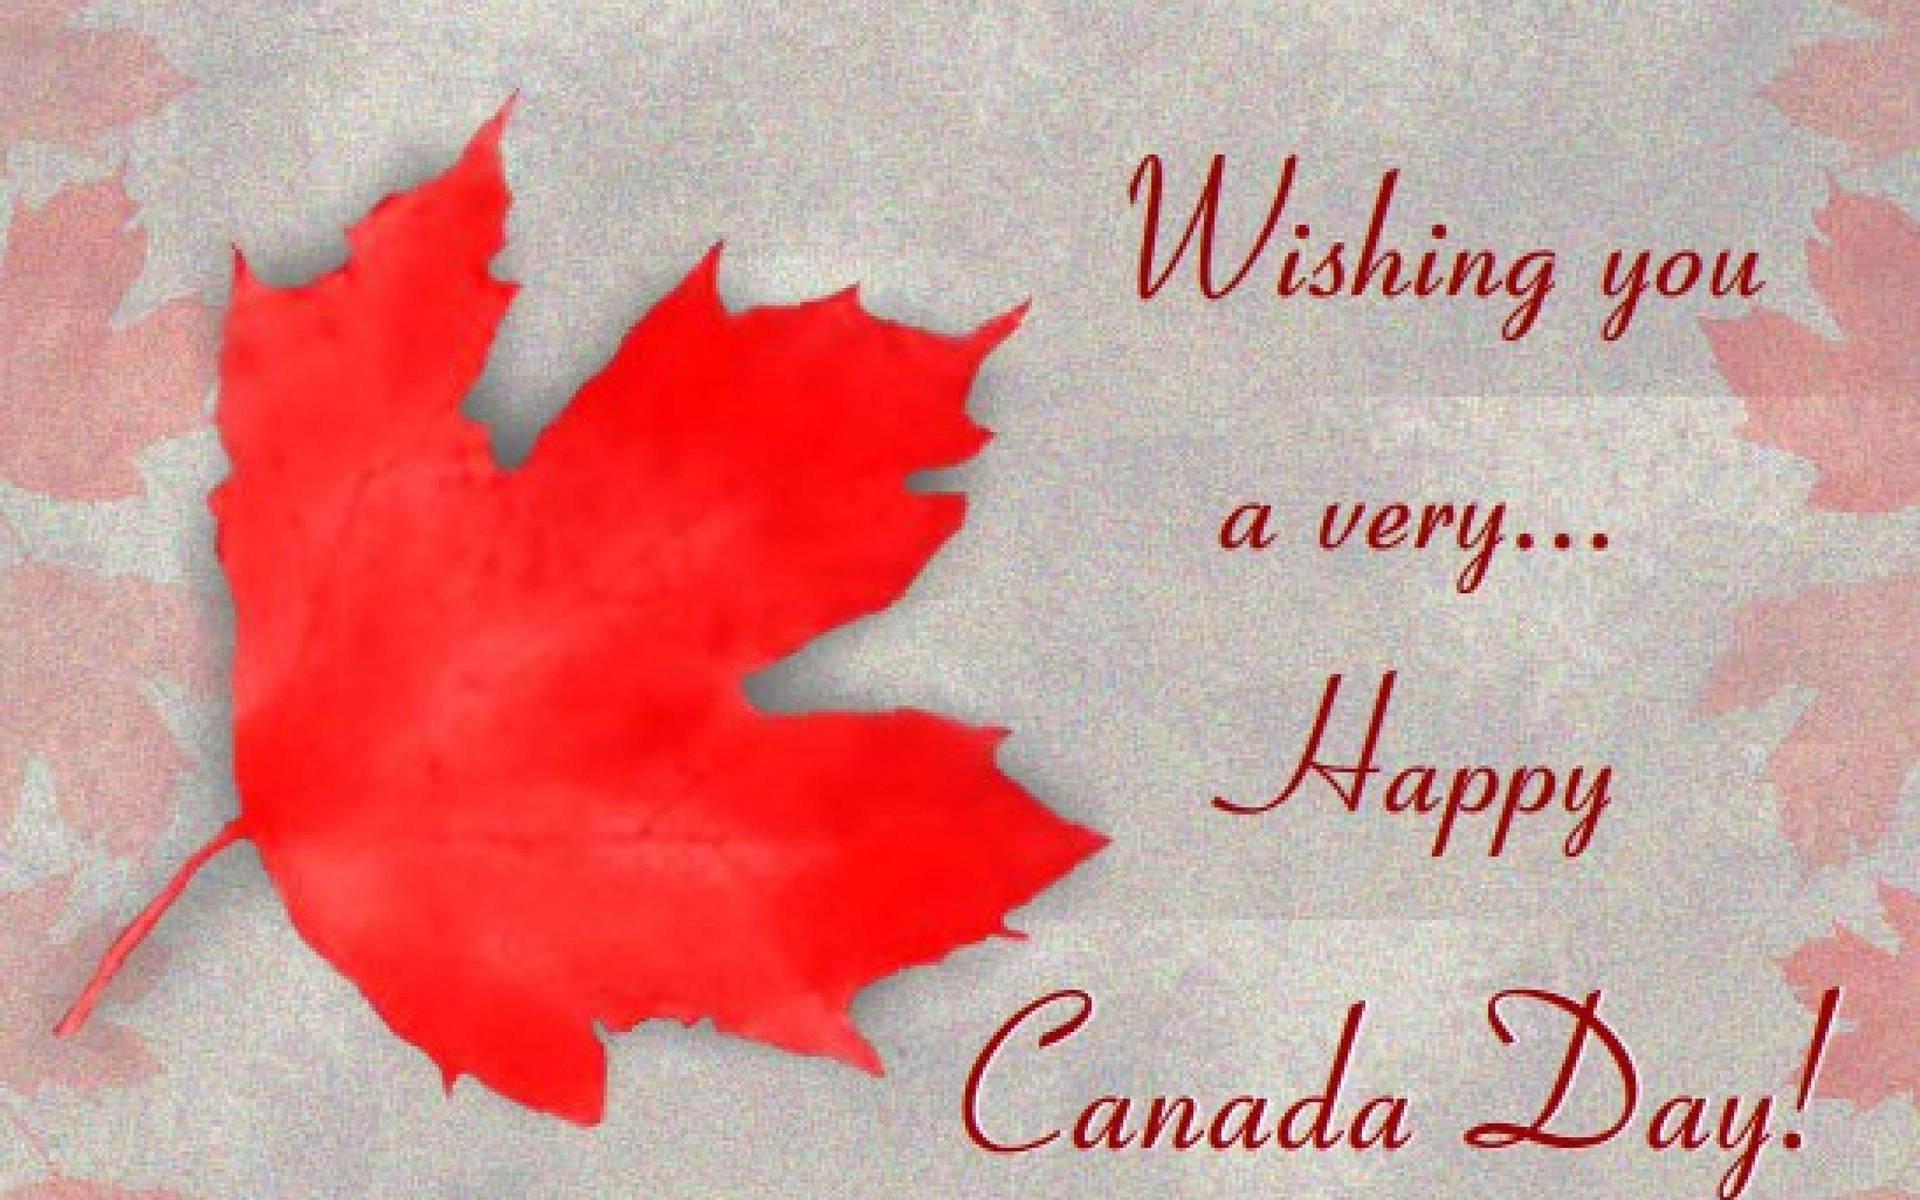 Canada Day Image